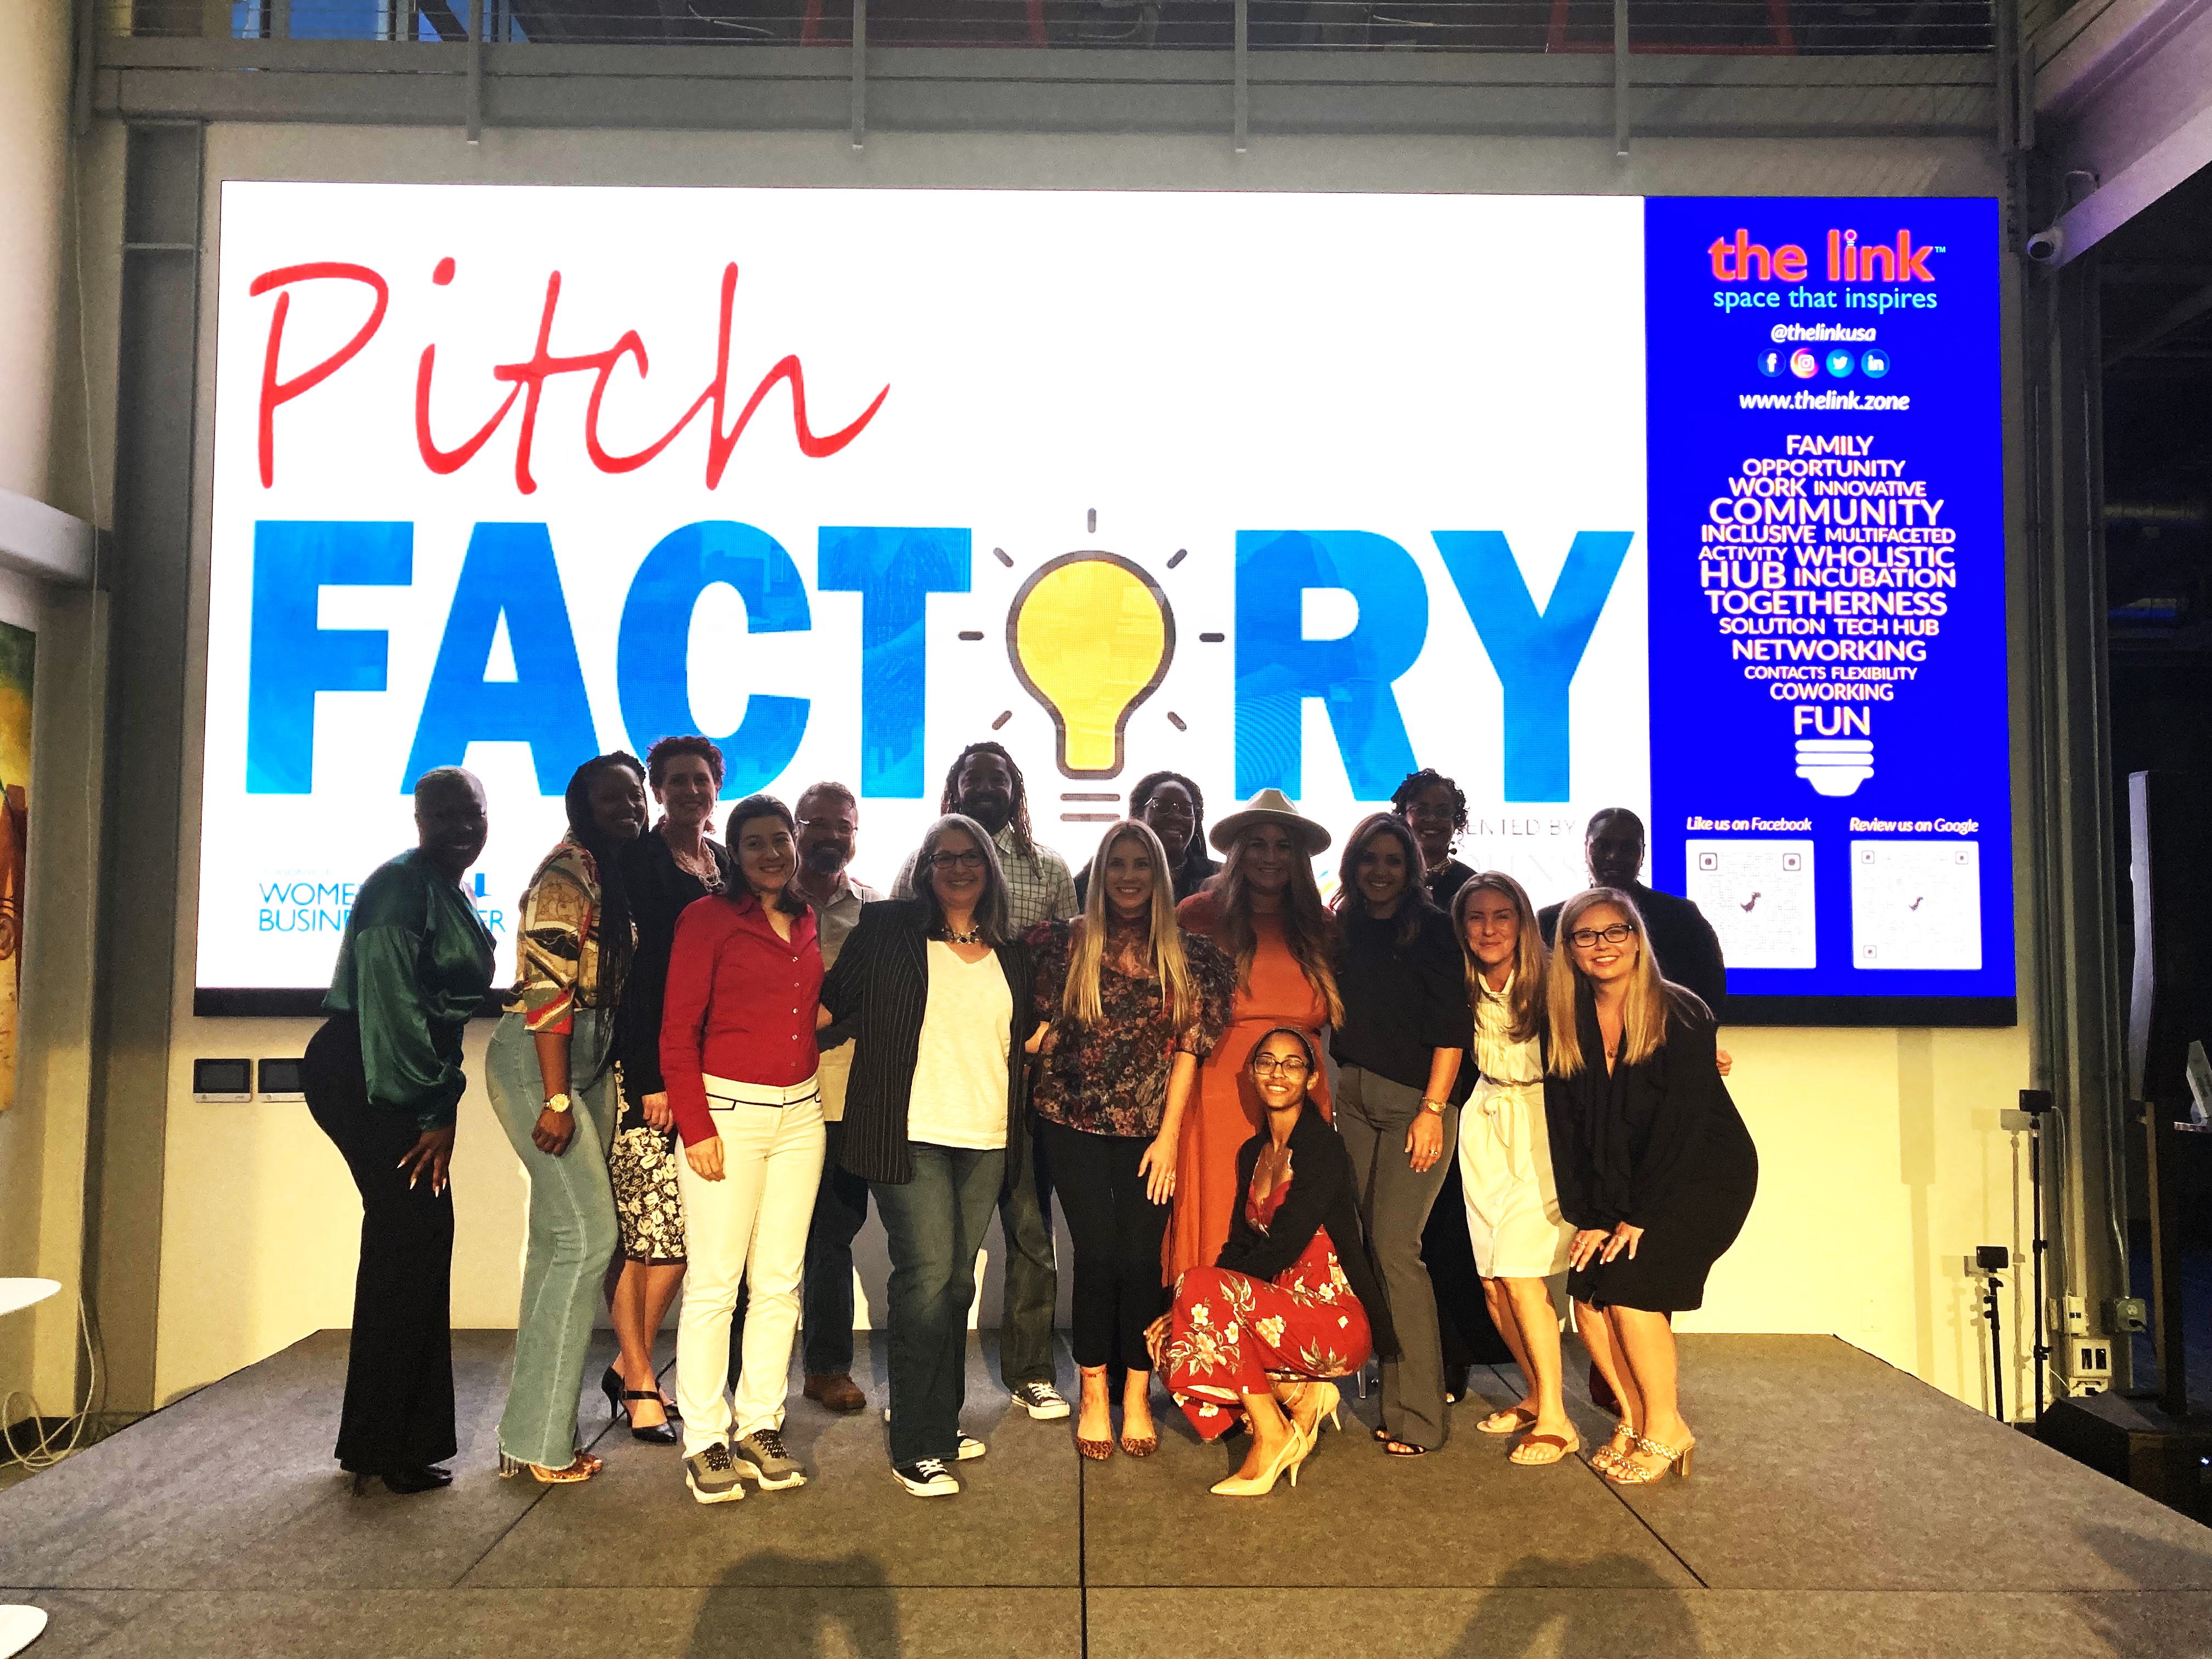 St. Johns County Chamber of Commerce sees another successful Pitch Factory program come to a close.